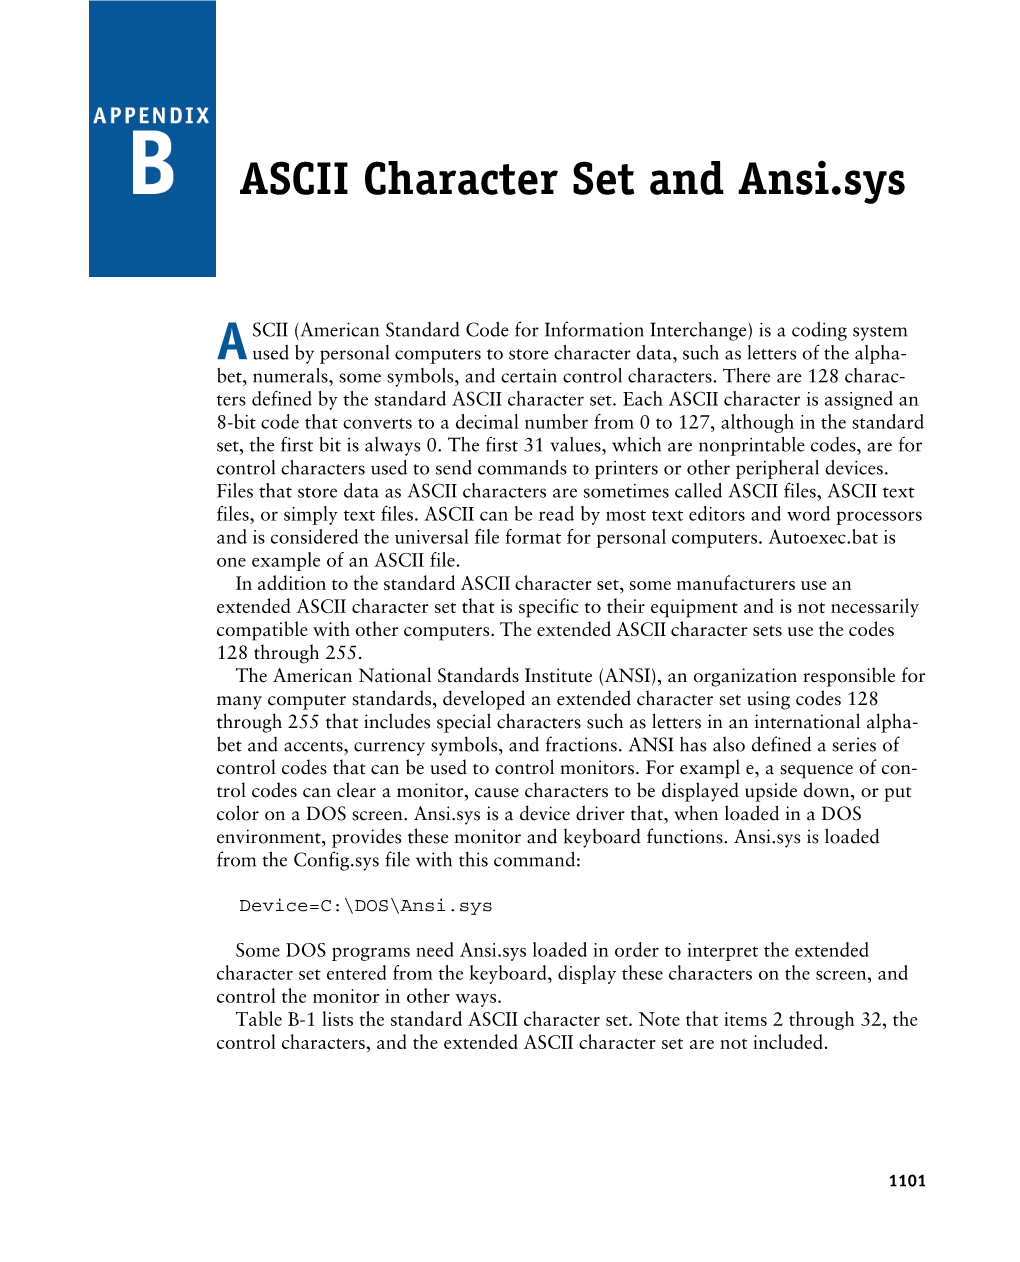 ASCII Character Set and Ansi.Sys